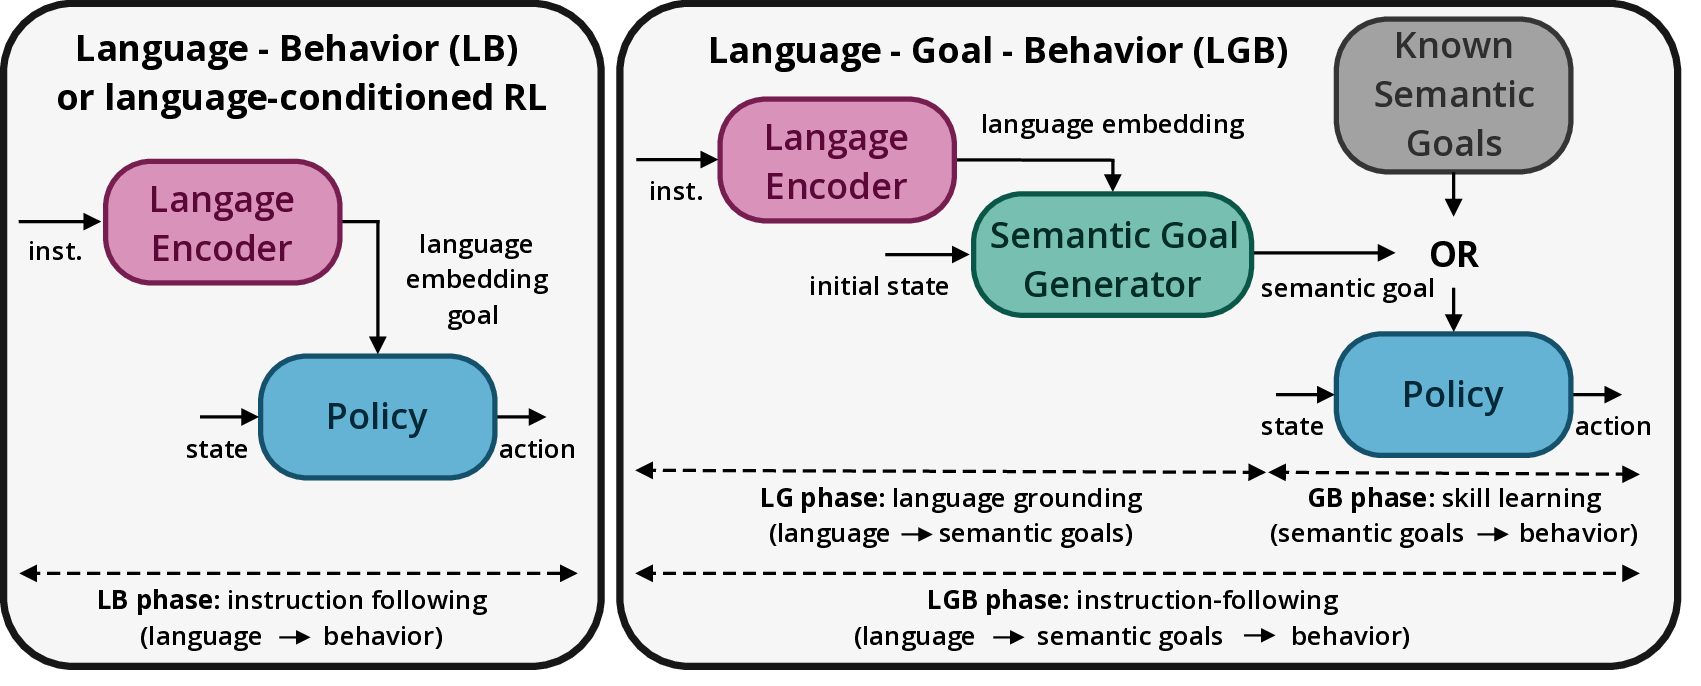 Language-Goal-Behavior architecture. The Language-Behavior architecture (left) is standard, but does not allow sensorimotor learning decoupled from language. We propose the LGB architecture to decouple skill learning and language grounding. Agents can learn to master skills oriented towards particular abstract perceptual configurations (pyramid of cubes, stacks of cubes) then, in a second phase, can learn to map instructions (inst.) to these semantic configurations via a semantic goal generator conditioned on language inputs (green).